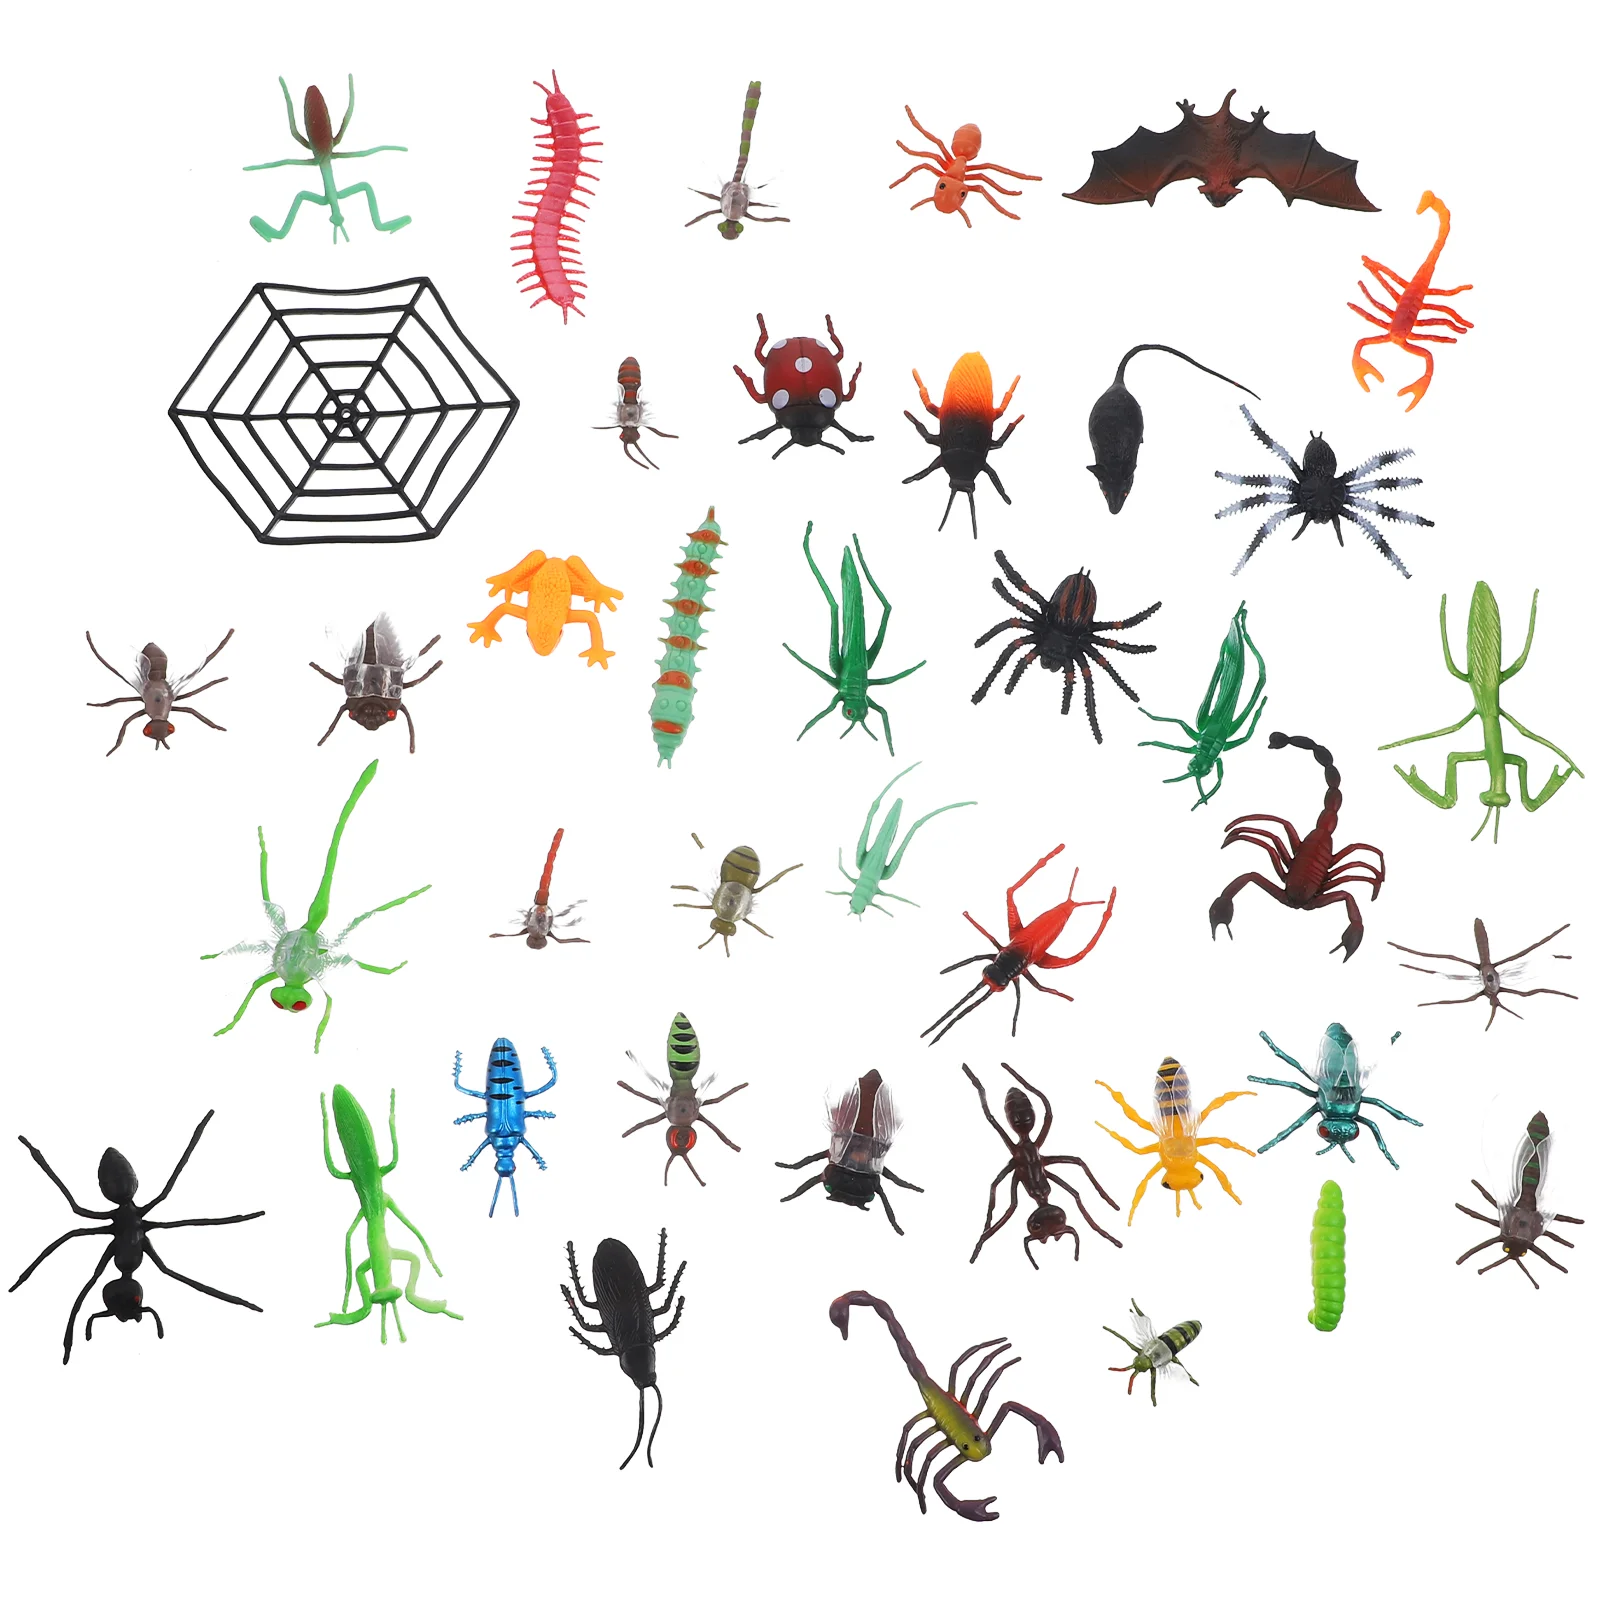 

39pcs Realistic Bugs Figures Toys Insects Figurines Toys Plastic Insects Models